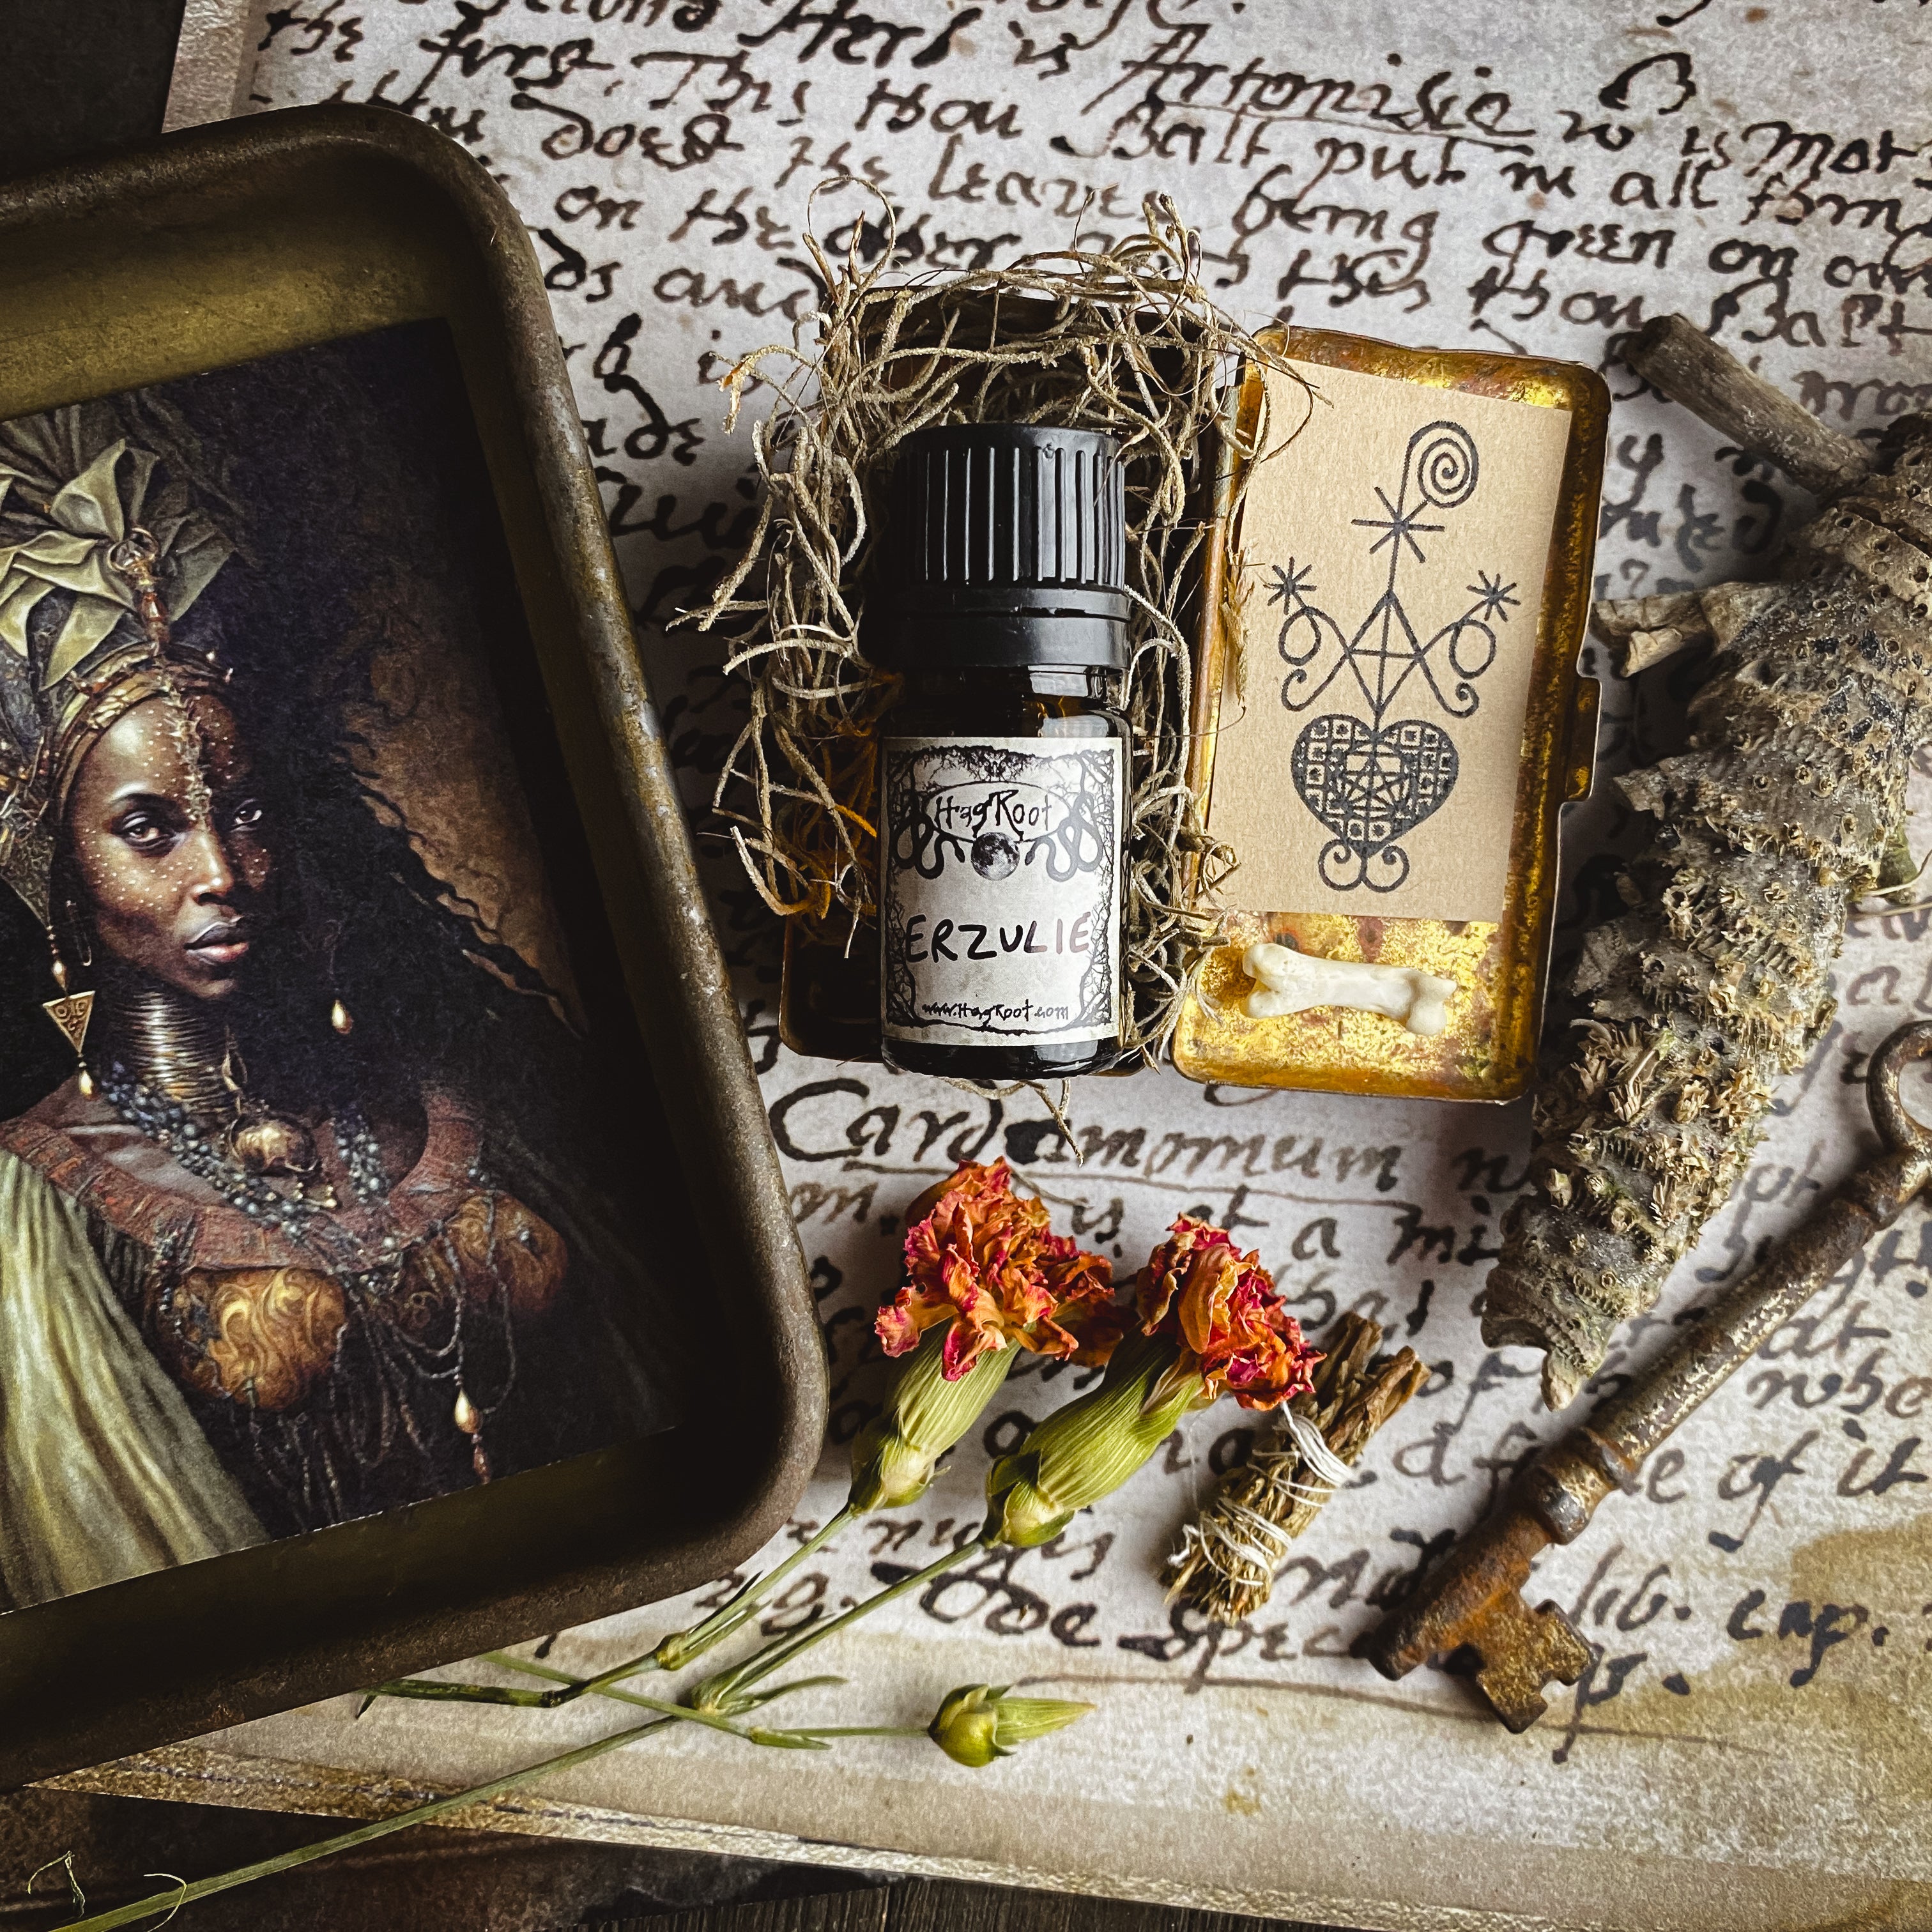 ERZULIE-(Patchouli, Hay, Sandalwood, Smoked Wood, Jasmine, Rose, Spicy Pepper)-Perfume, Cologne, Anointing, Ritual Oil